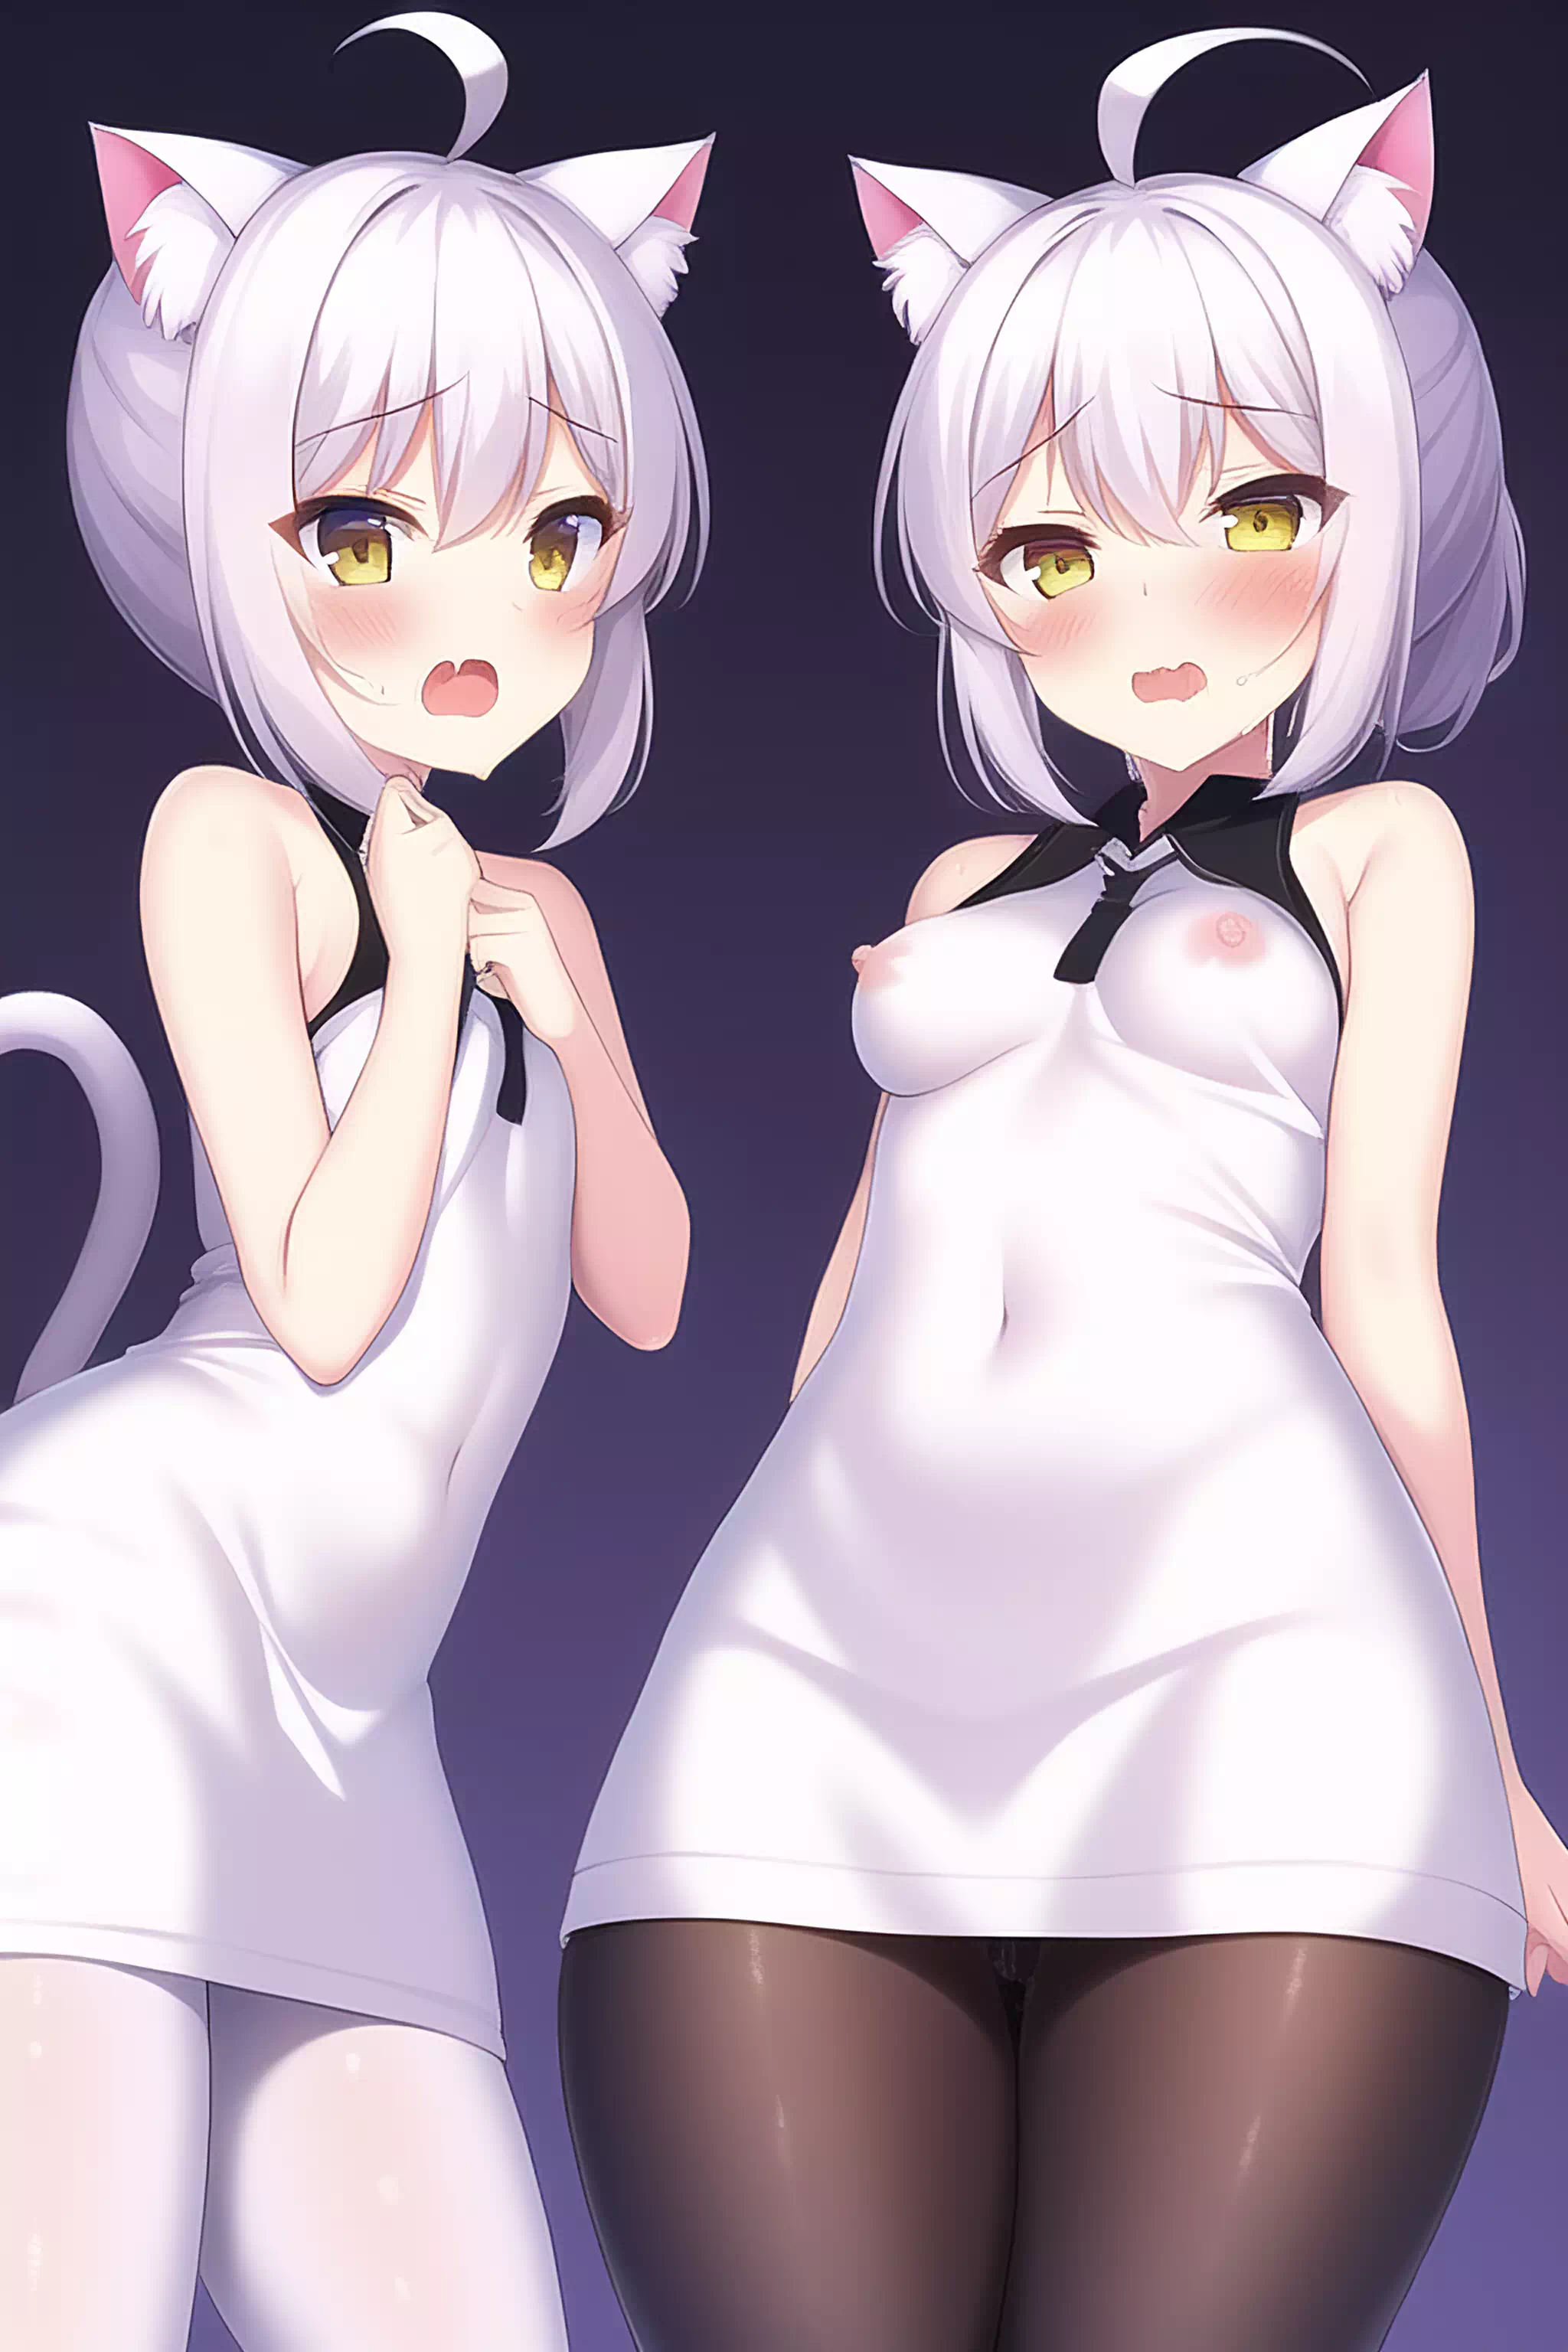 Do you want some white cat？ NSFW